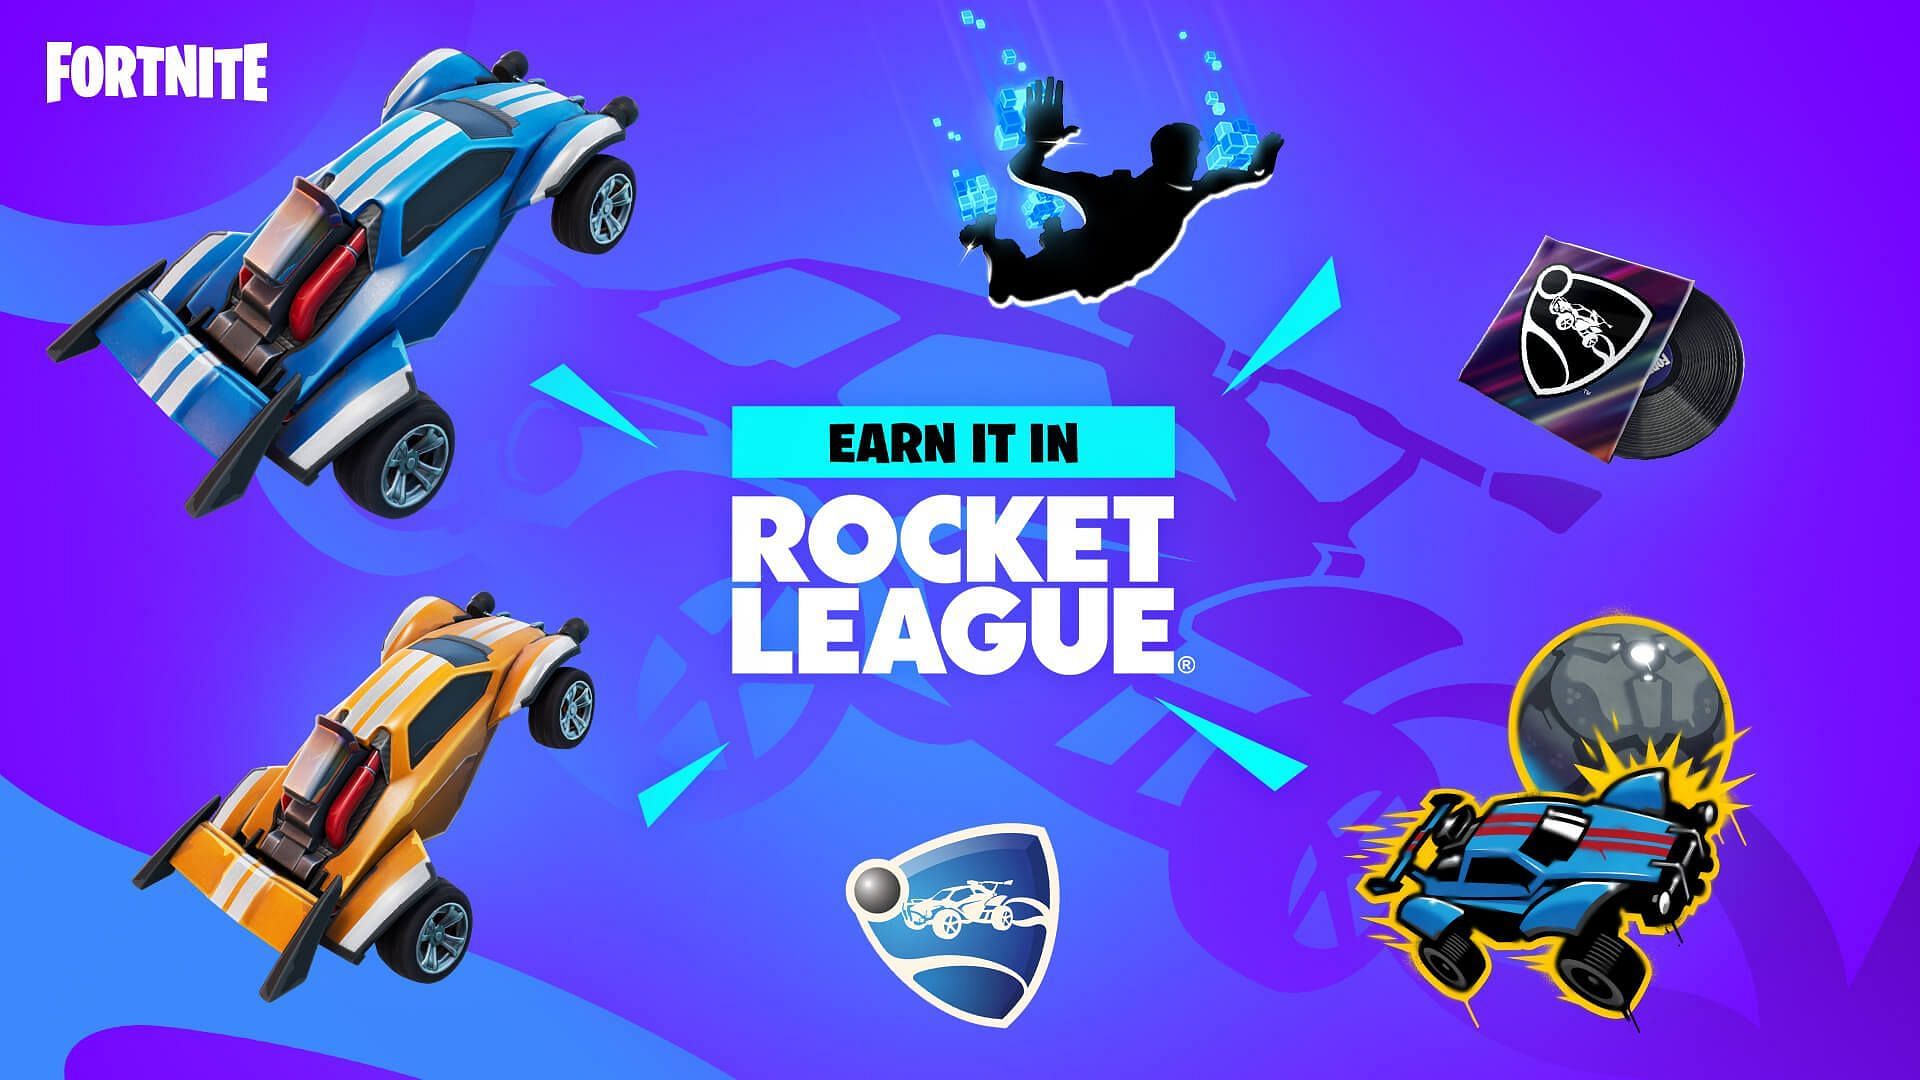 Epic Games will soon release a new Rocket League collaboration to its battle royale game (Image via Epic Games)